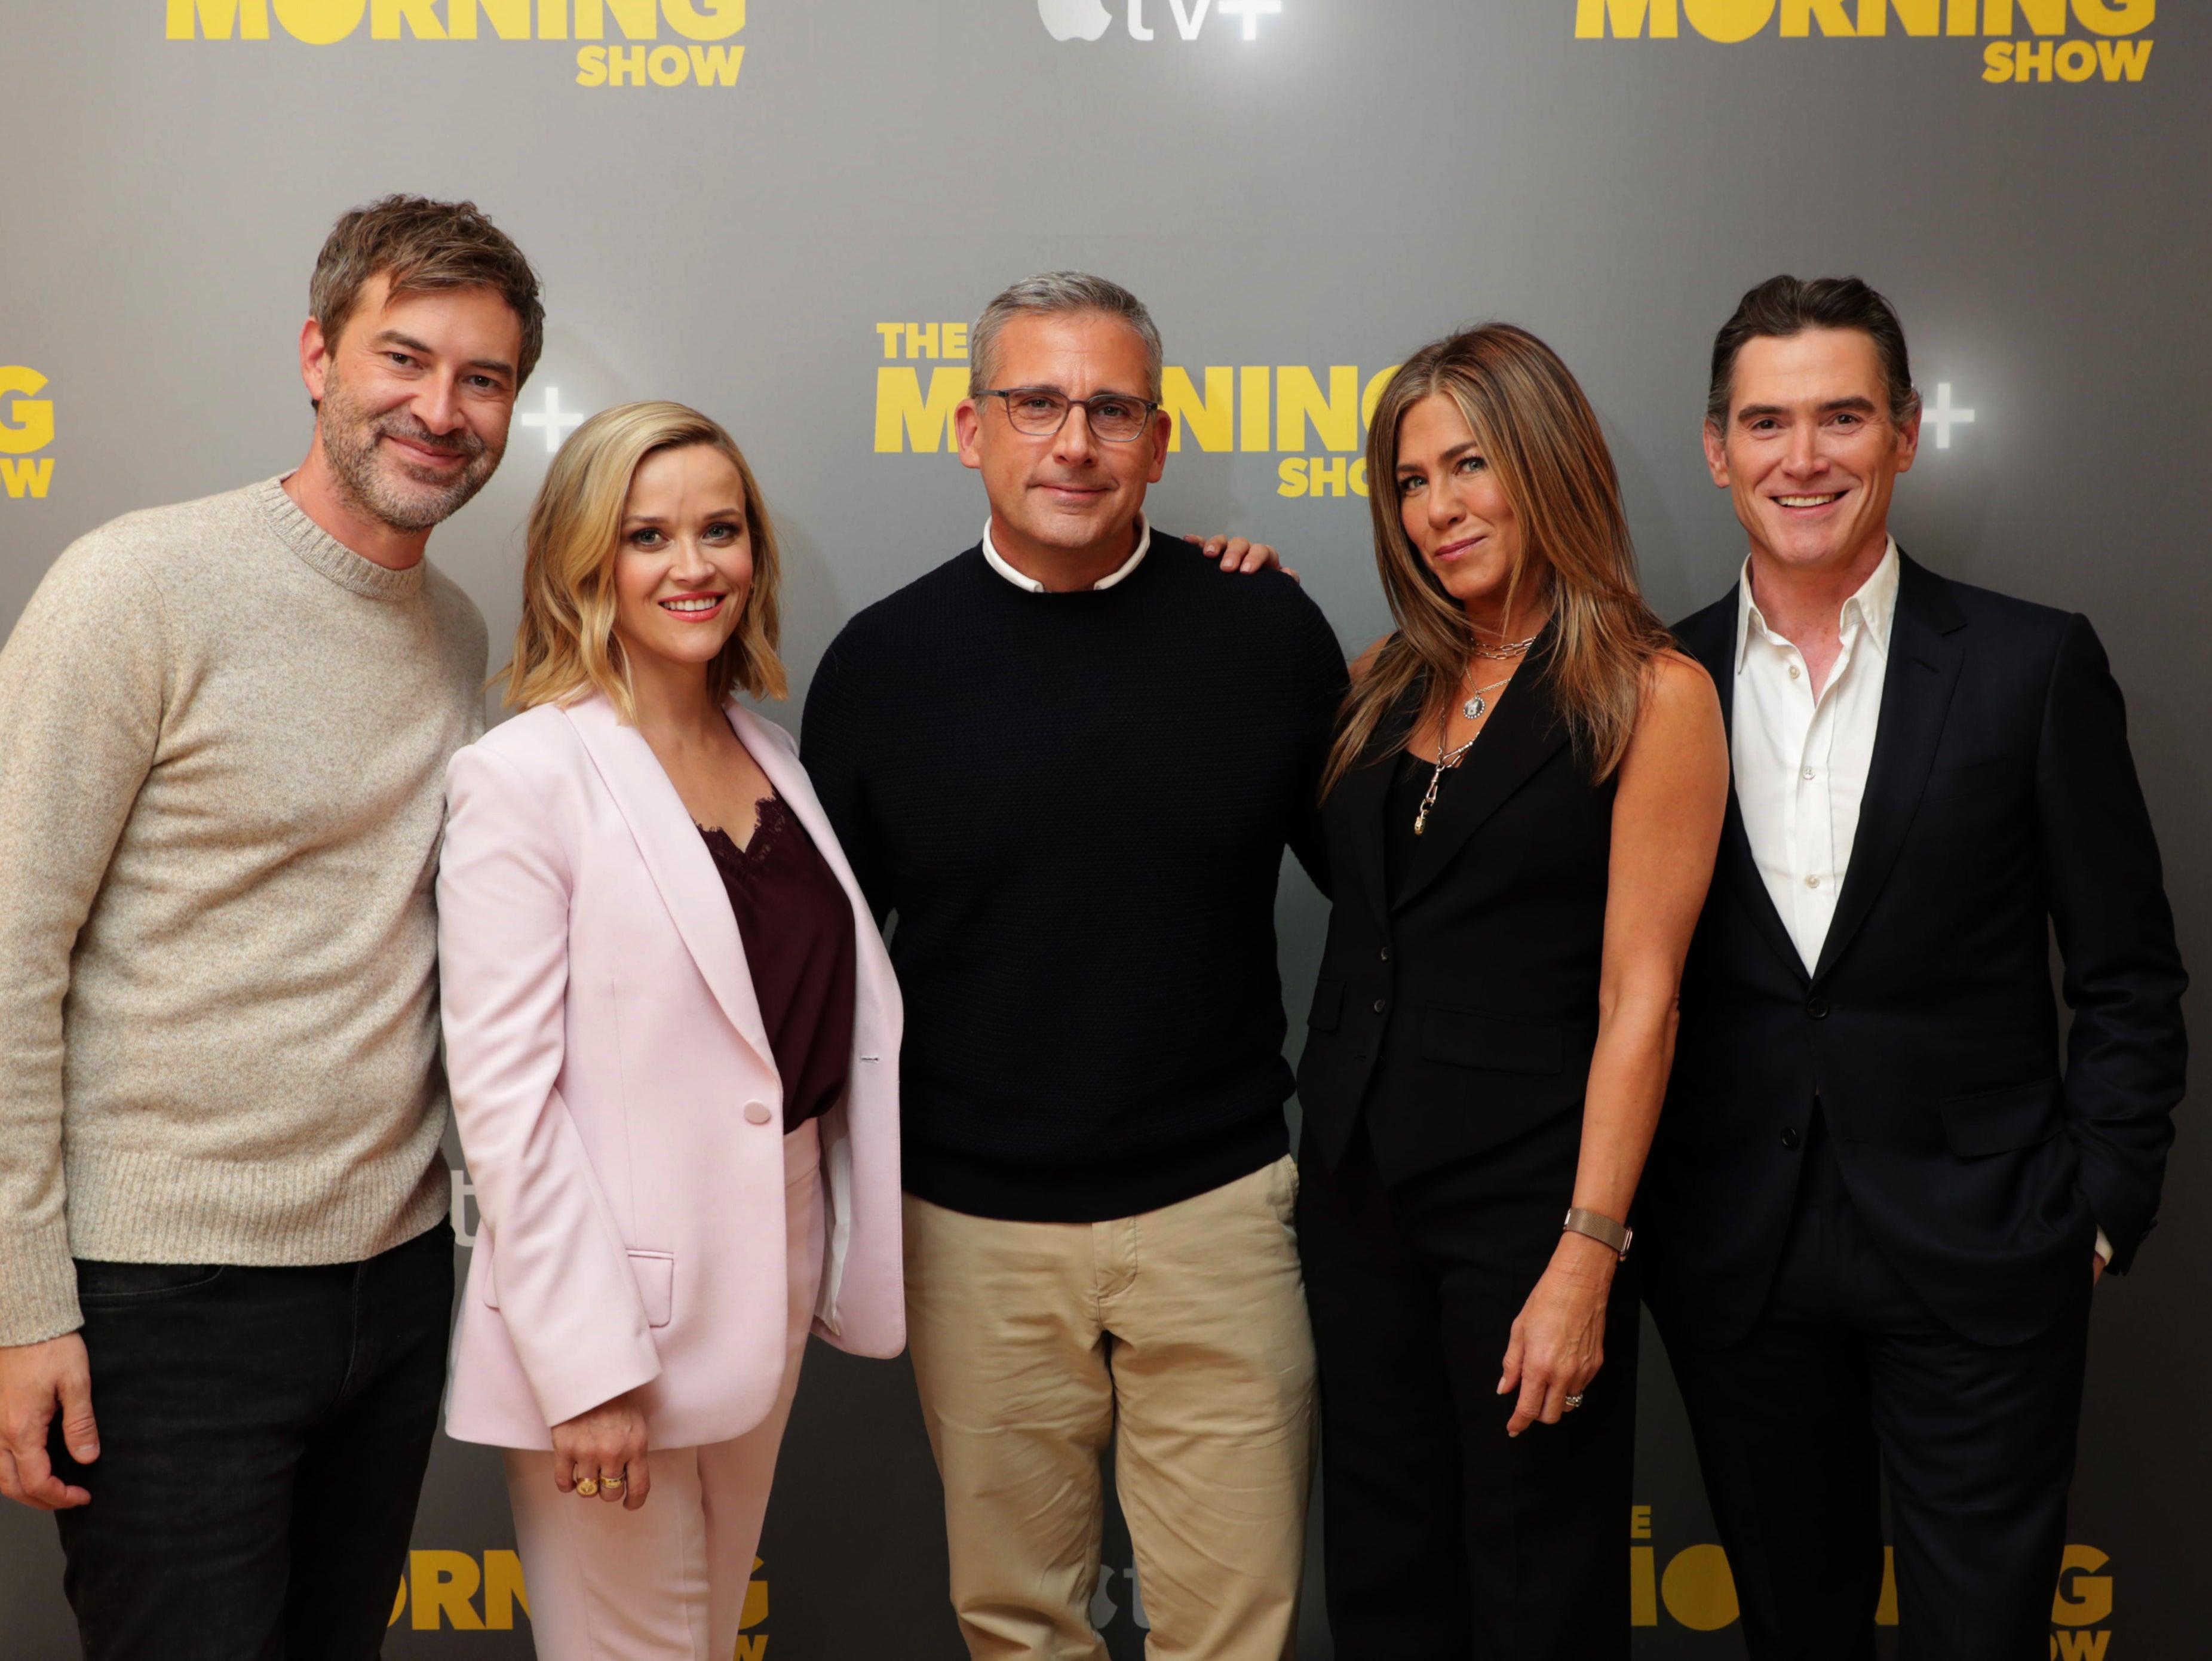 ‘The Morning Show’ cast: Mark Duplass, Reese Witherspoon, Steve Carell, Jennifer Aniston and Crudup